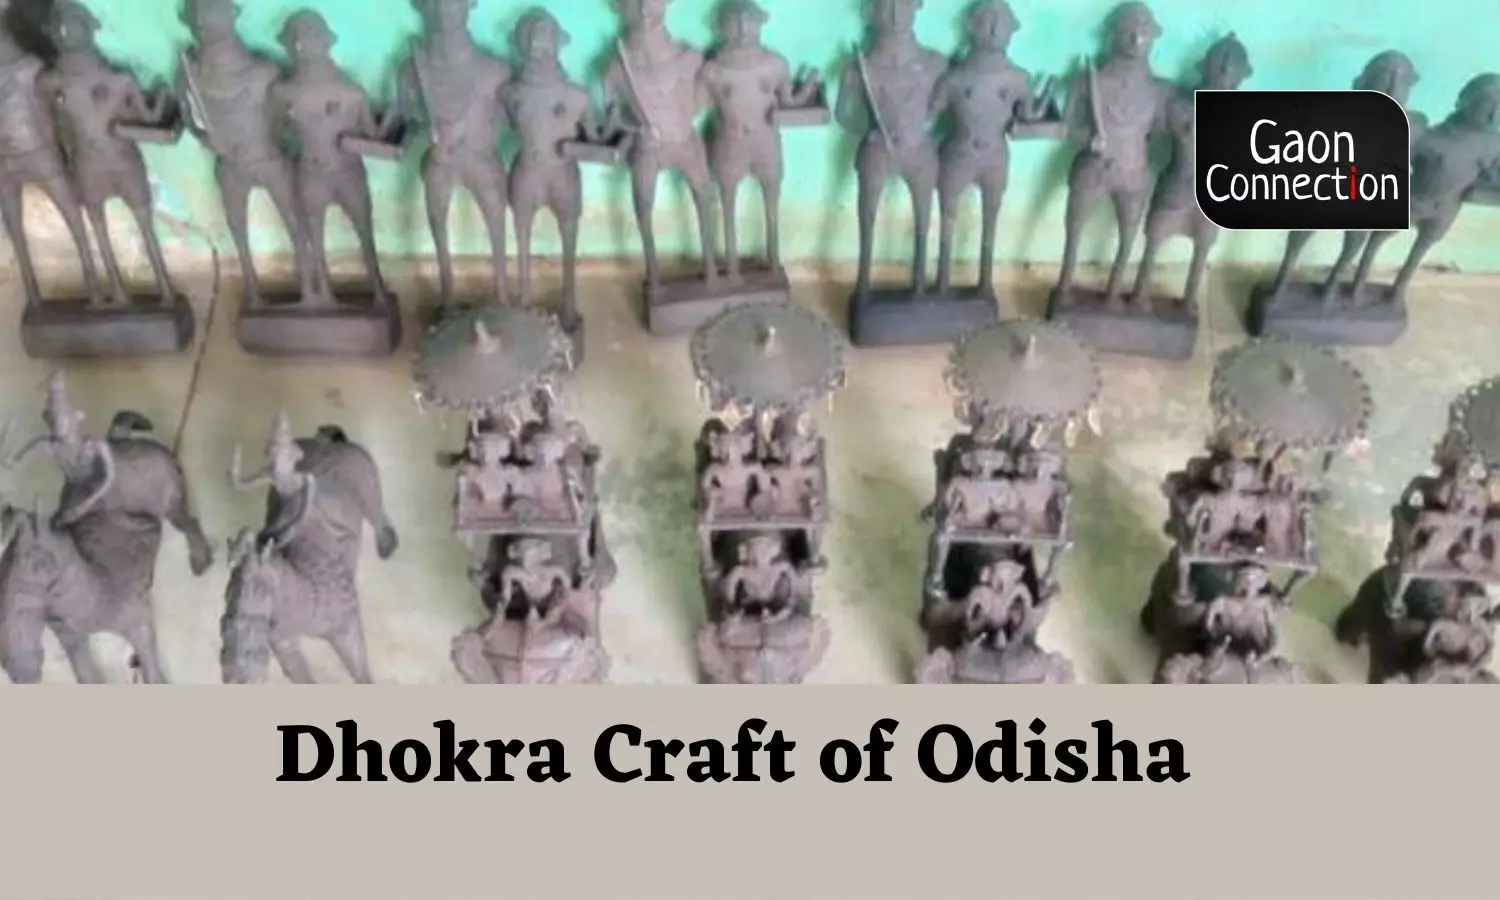 Dhokra craft brings back smiles on the faces of artisans in Odishas tribal heartland